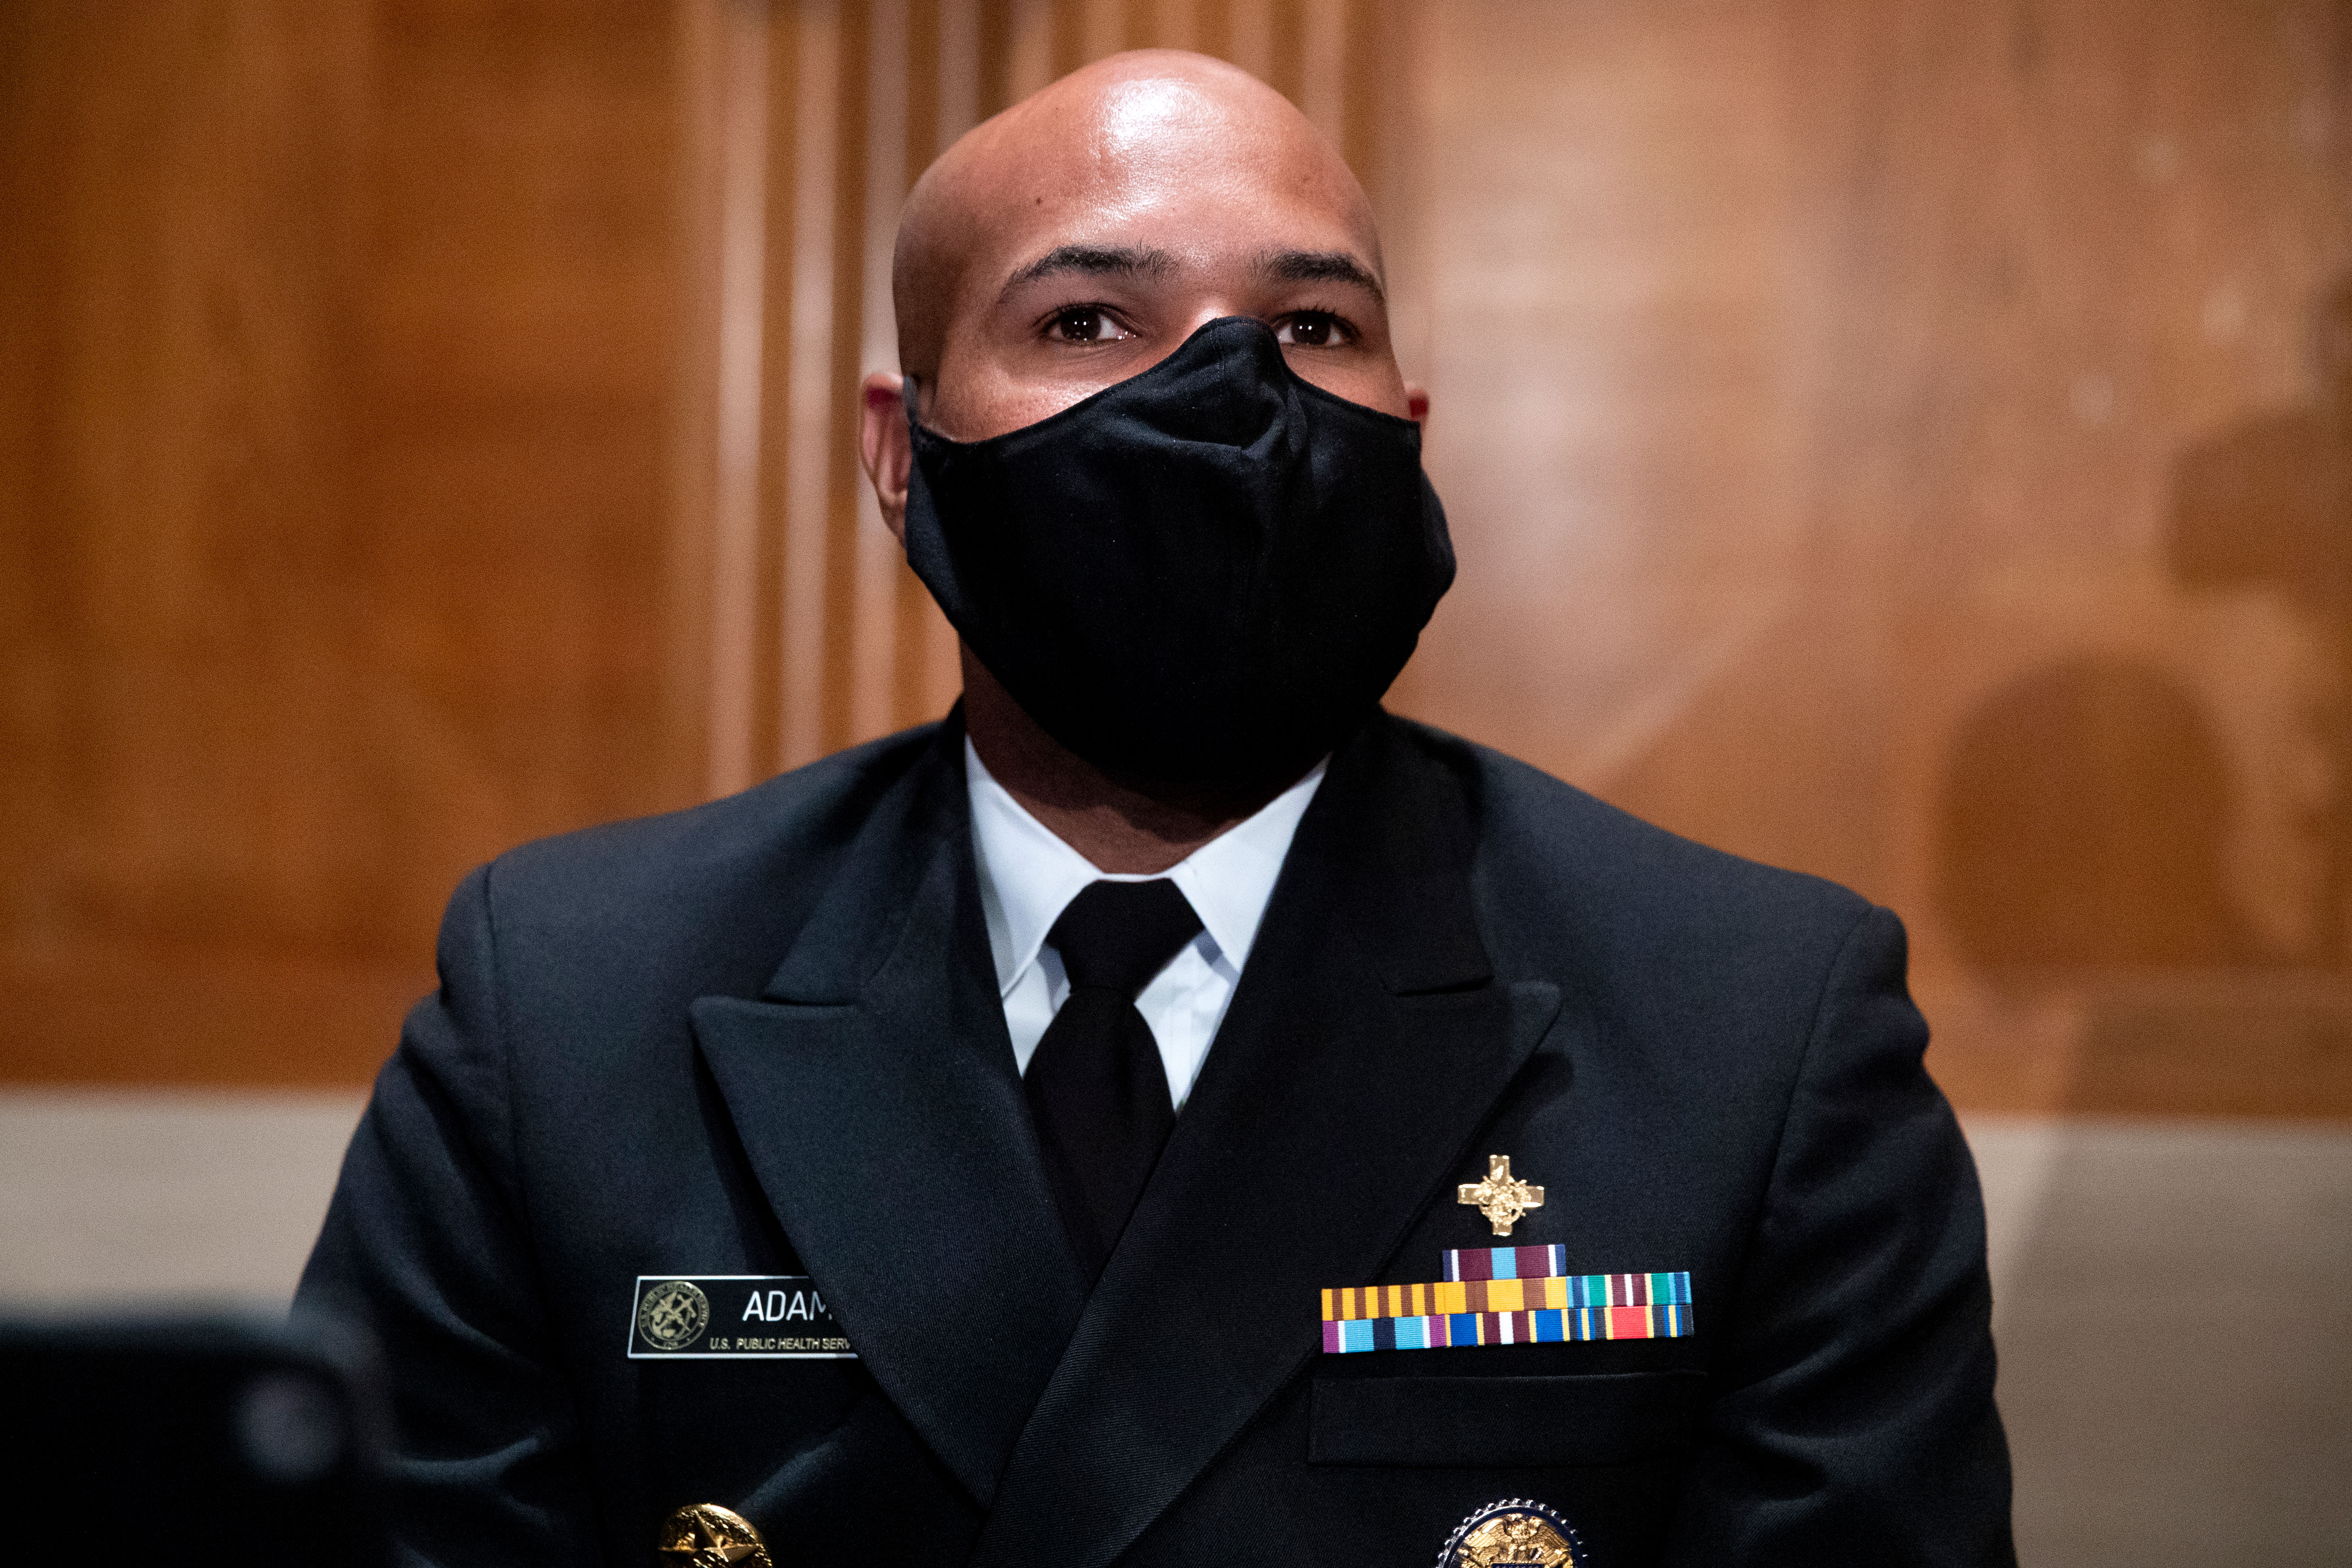 US Surgeon General Dr. Jerome Adams attends a hearing on September 9 in Washington, DC.